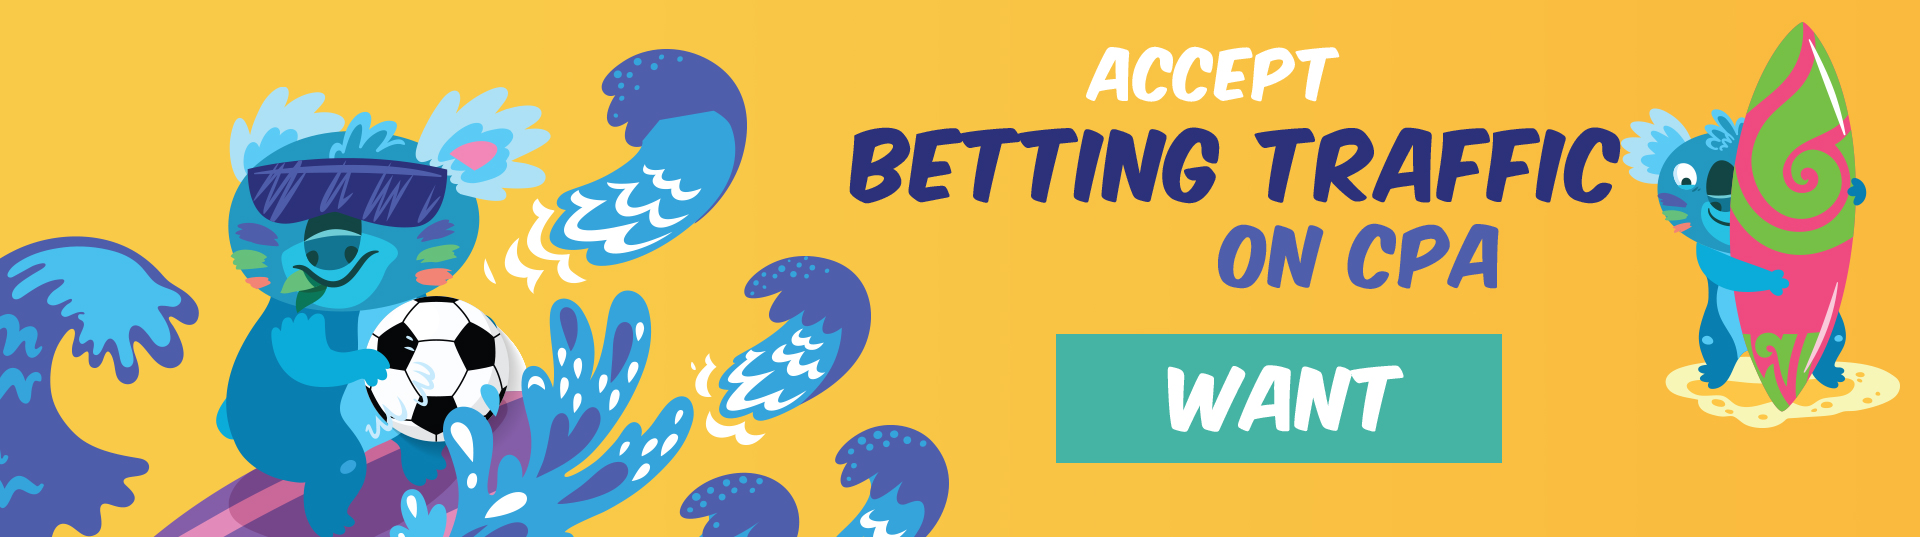 Want CPA for Betting